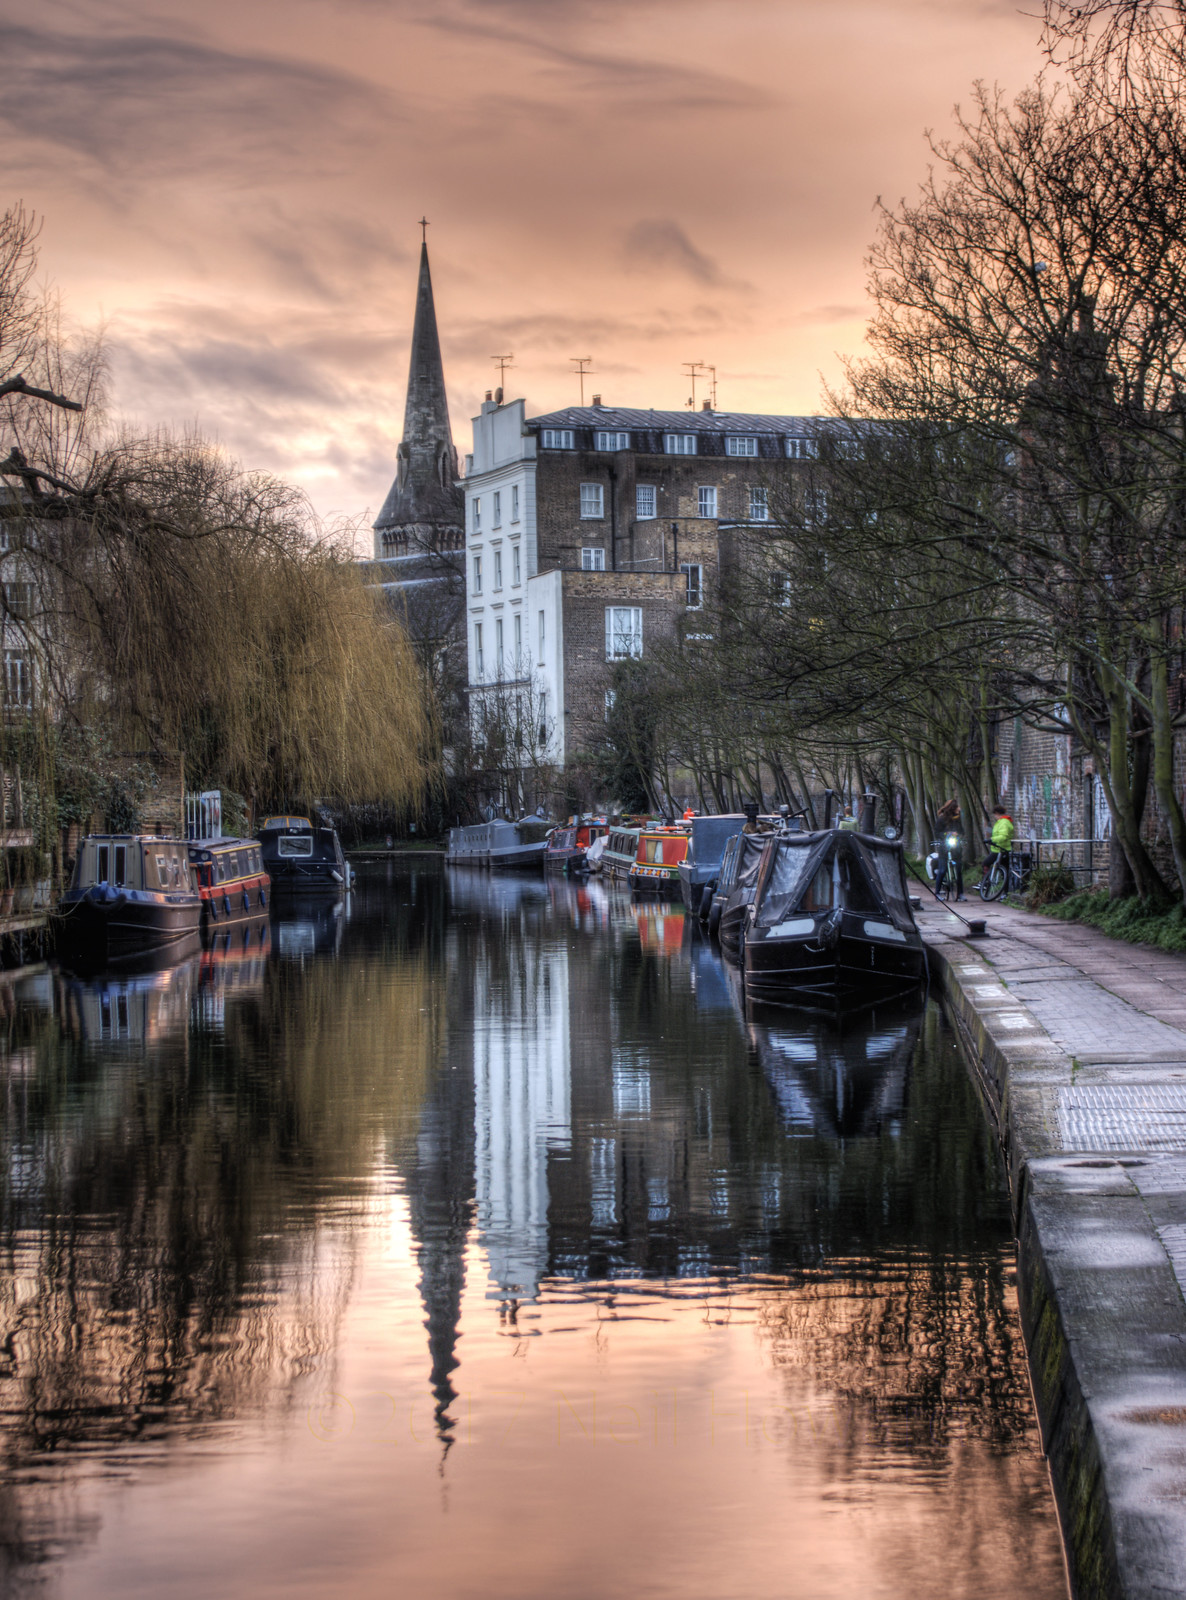 Sunset over the Regent's Canal in Camden, London. Credit Neil Howard, flickr